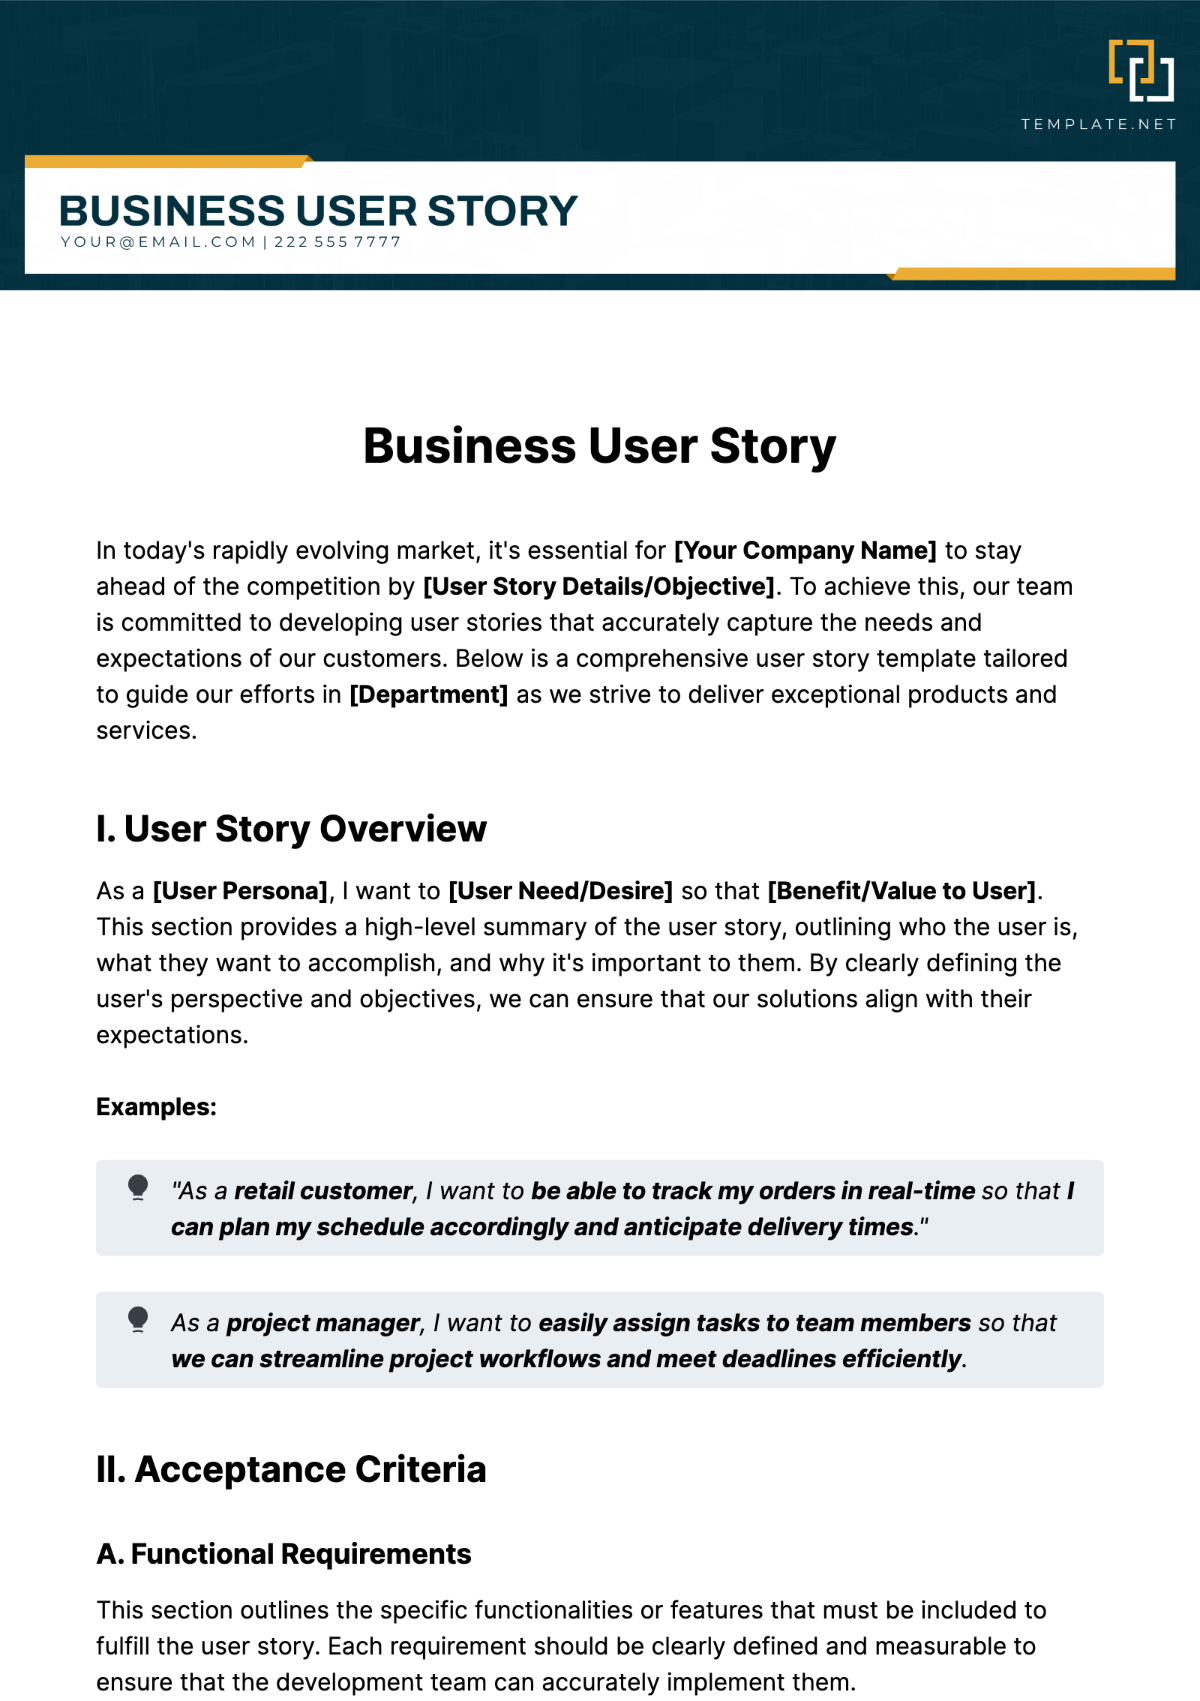 Business User Story Template